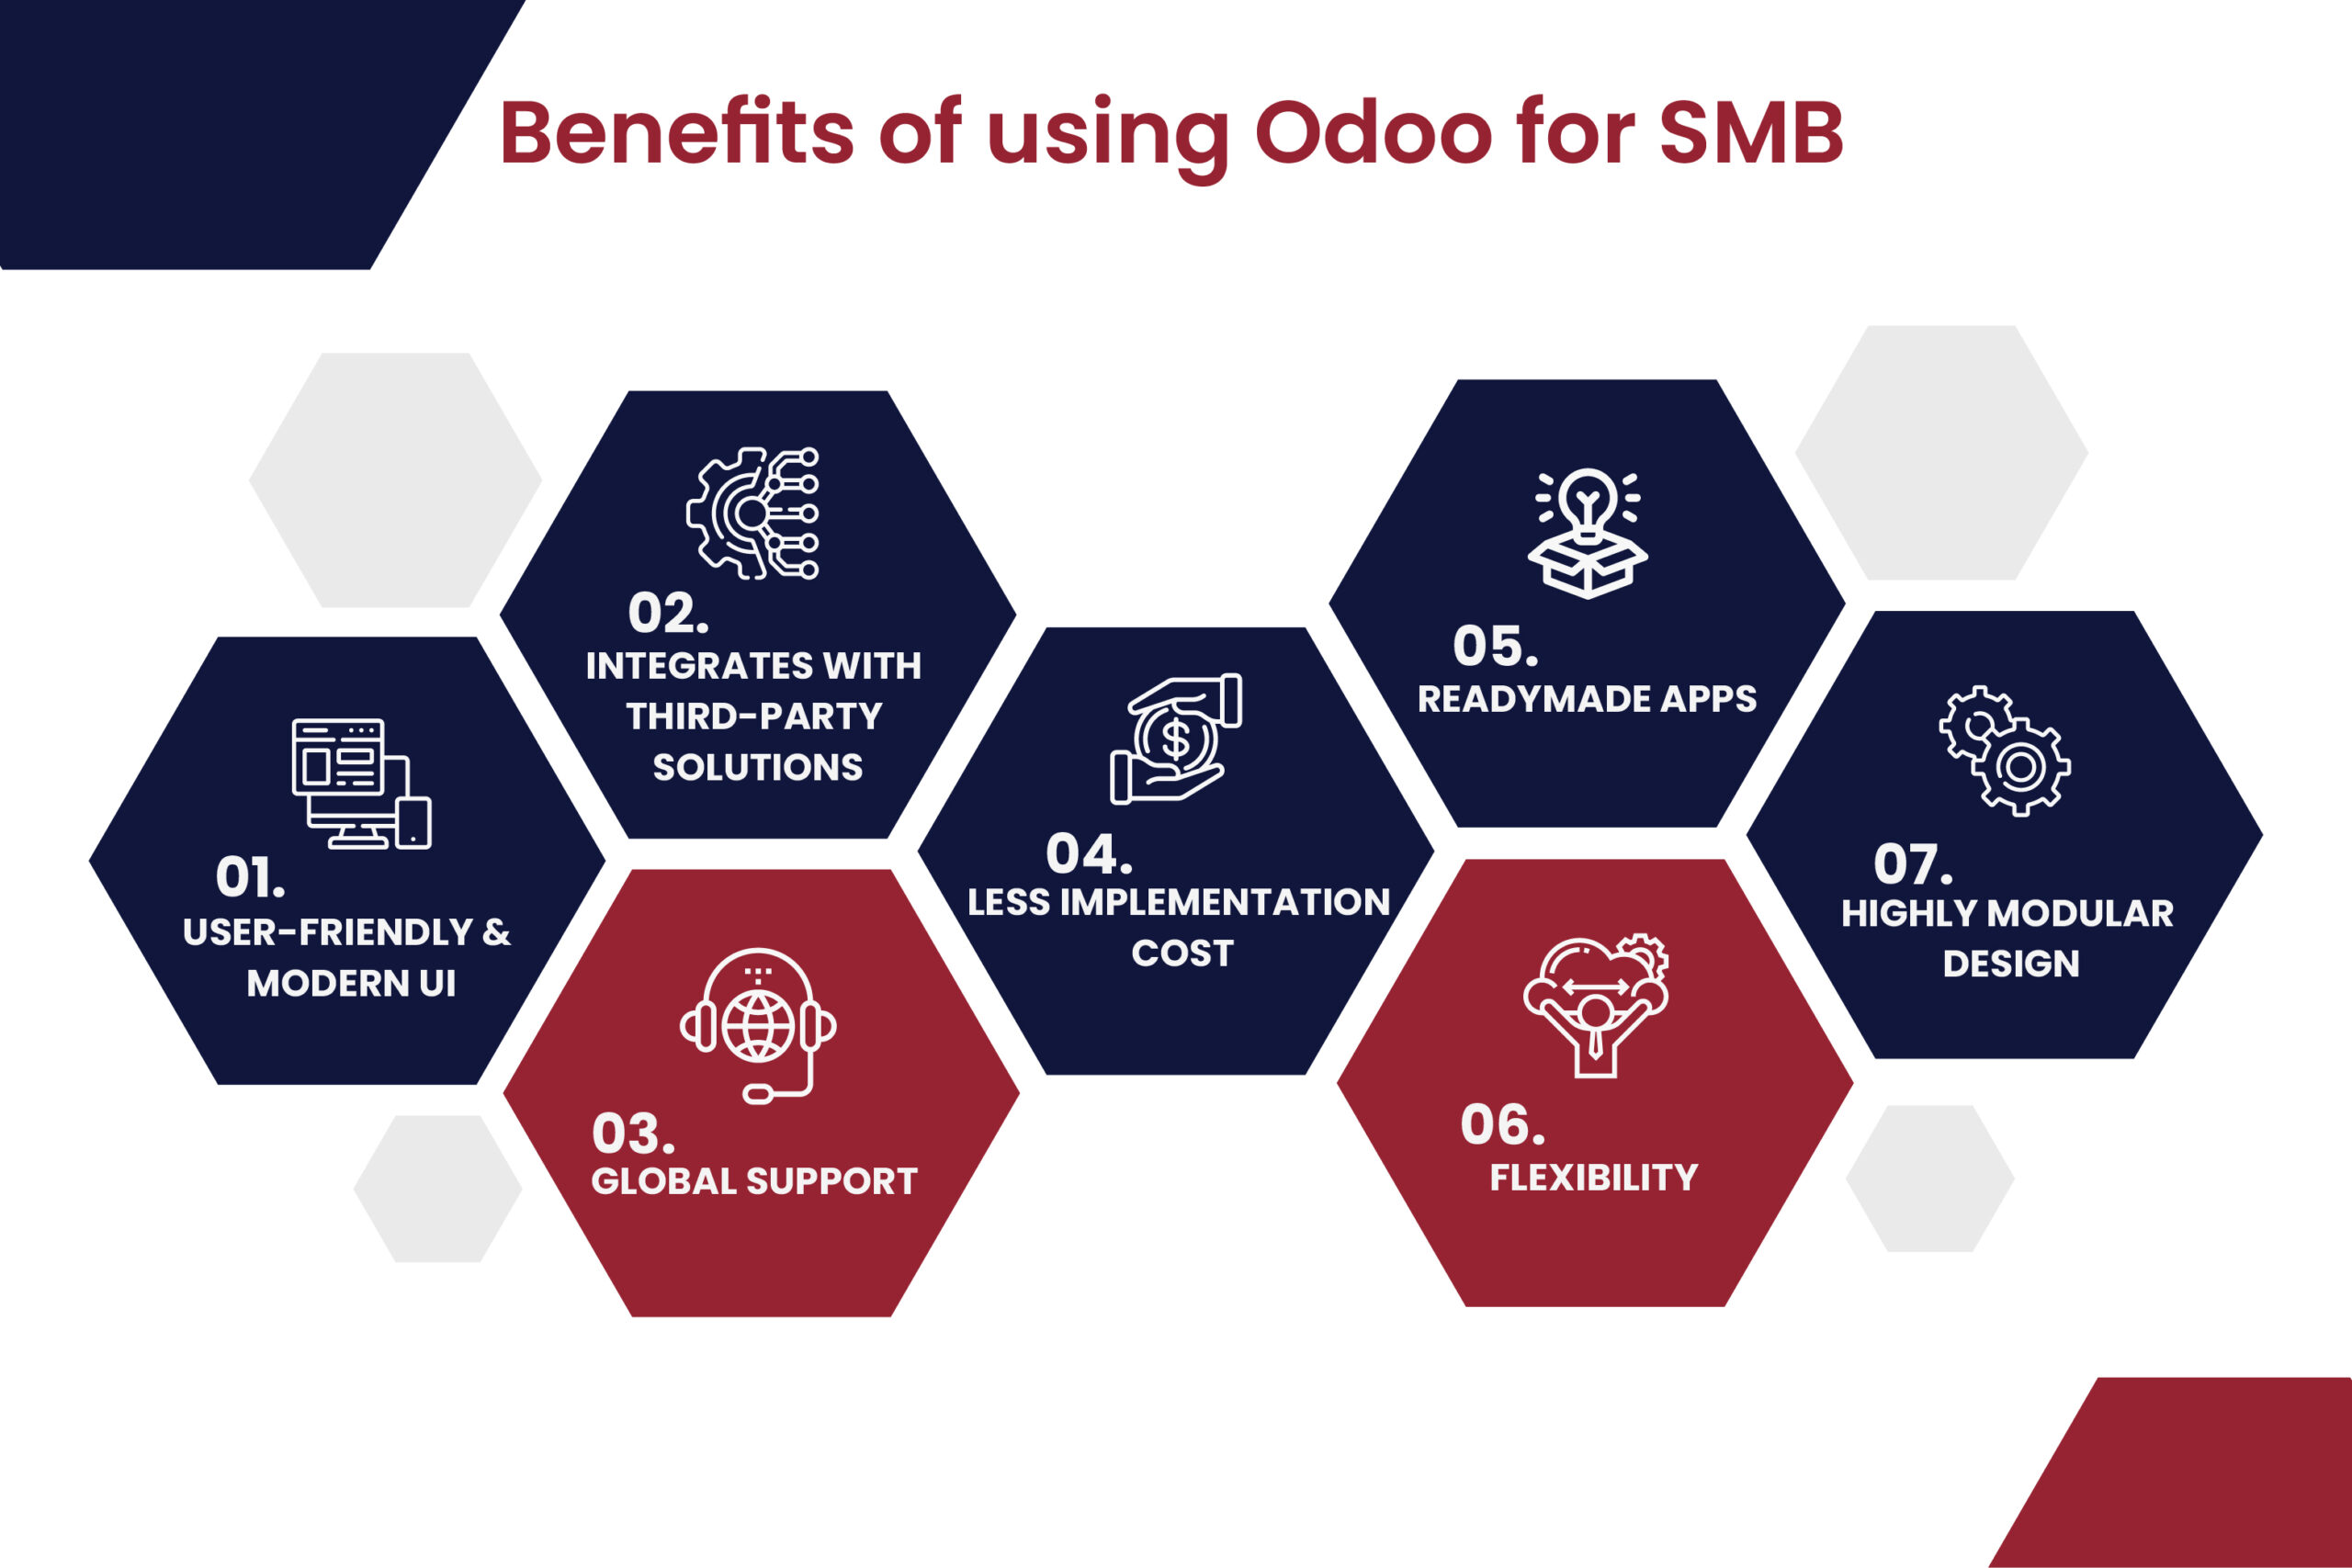 Benefits of using Odoo for SMBs